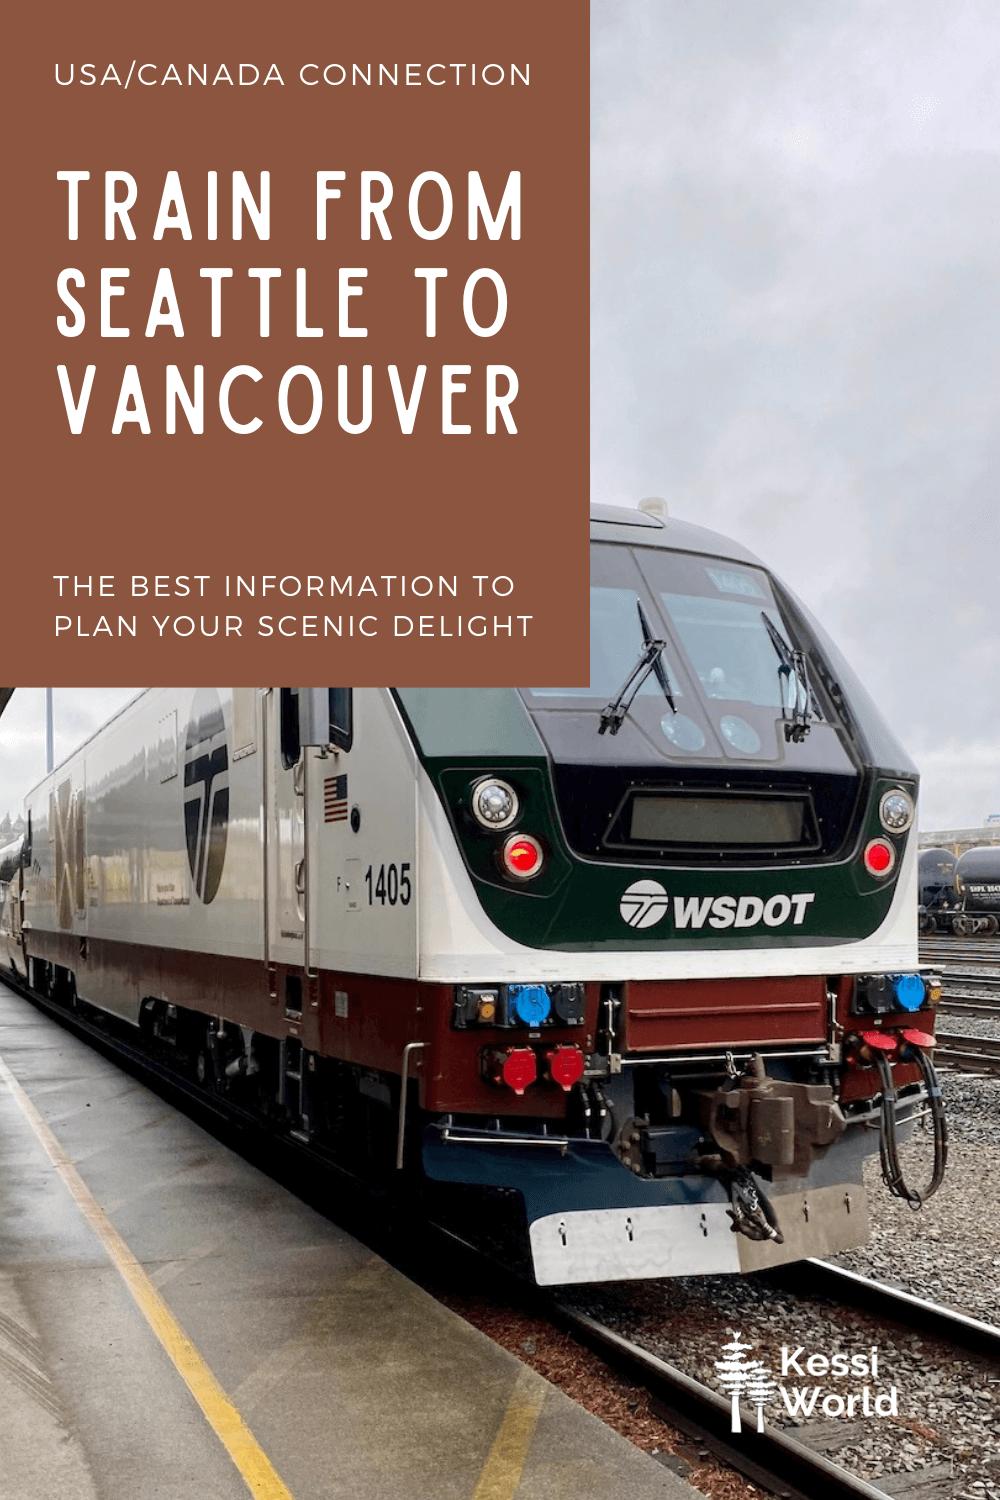 This Pinterest Pin shows a train that's part of Amtrak Cascades traveling between Seattle and Vancouver. It is stopped on a track and the platform is concrete with yellow painted lines. The green and white front of the Amtrak train says SWDOT.